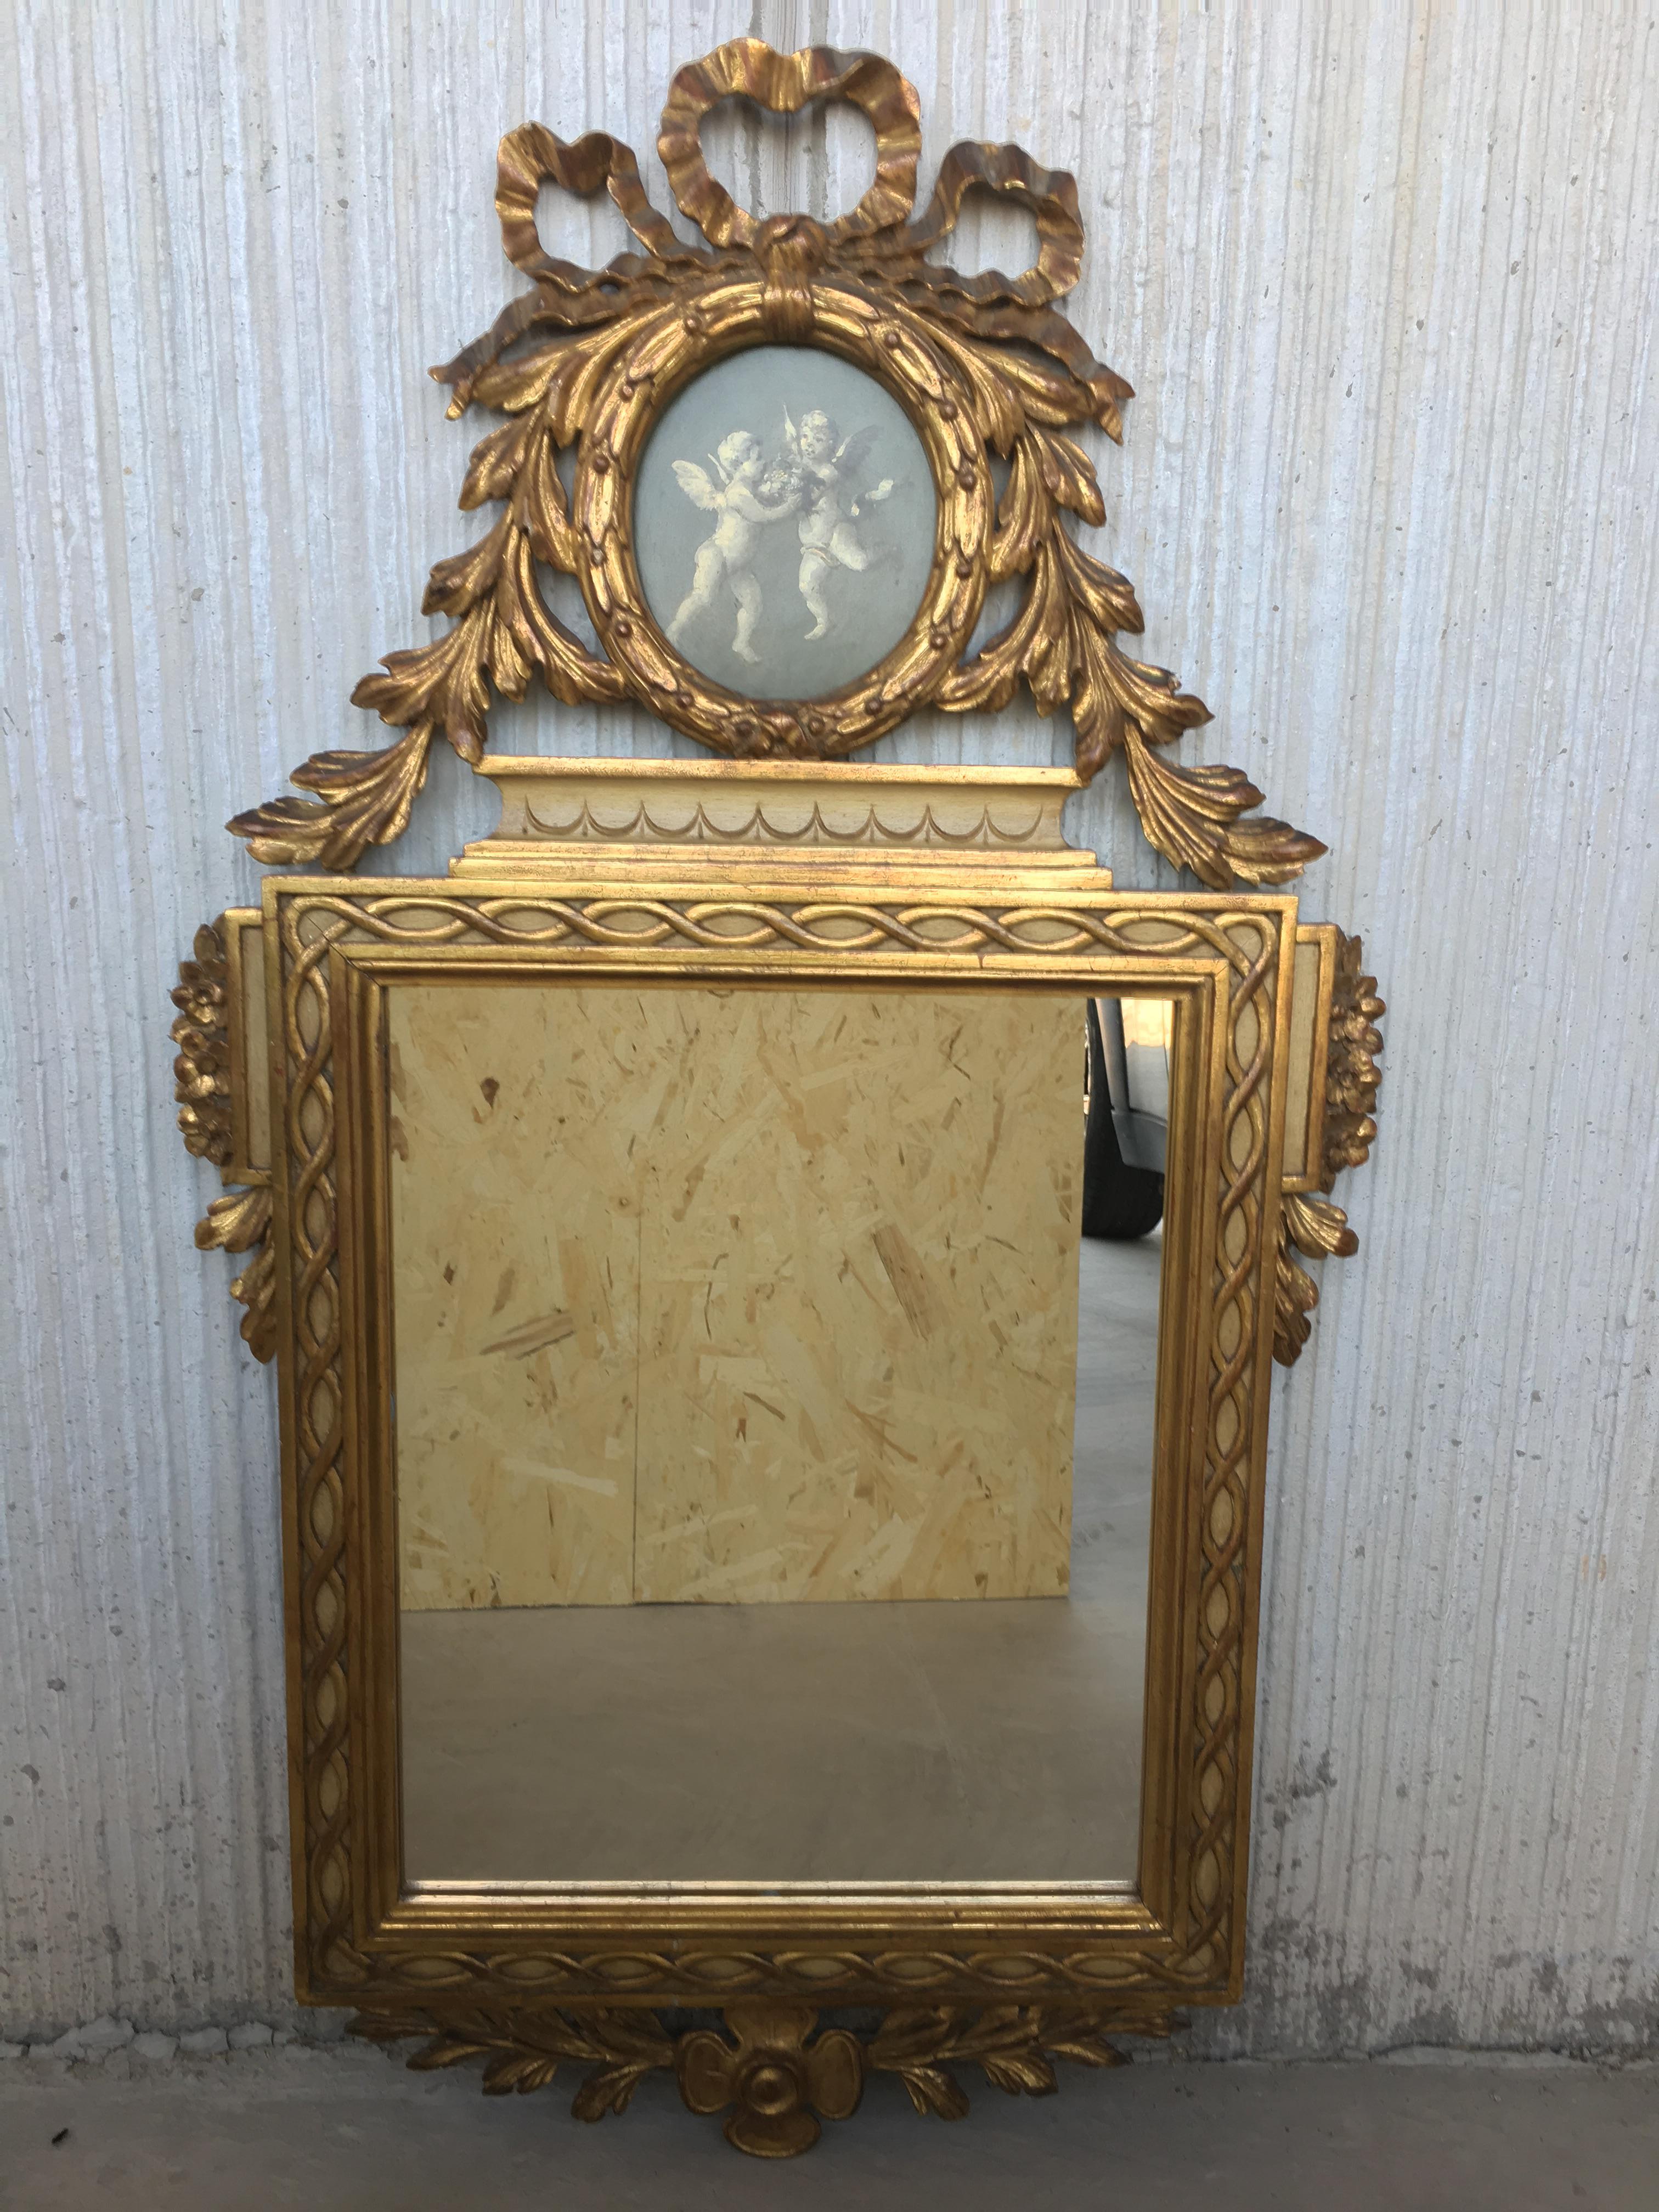 19th century, French, Louis XVI painted and gilt trumeau mirror depicting cherubs.